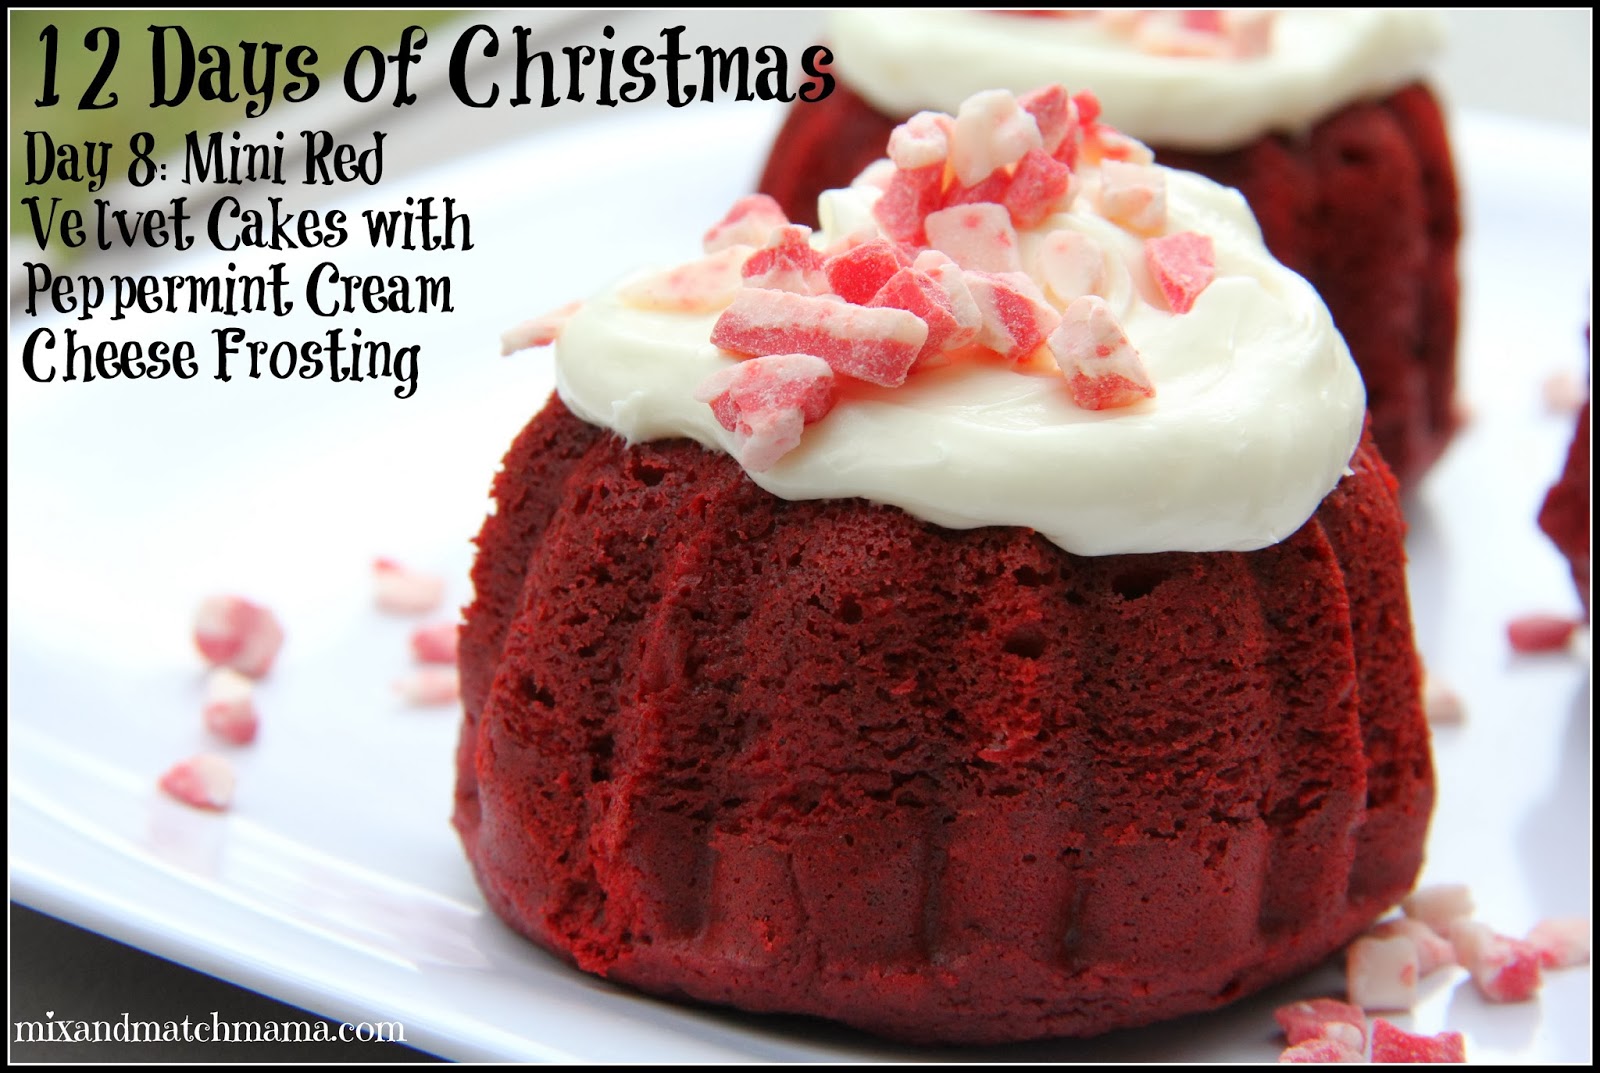 On the 8th Day of Christmas: I made mini Red Velvet Cakes! | Mix and Match Mama